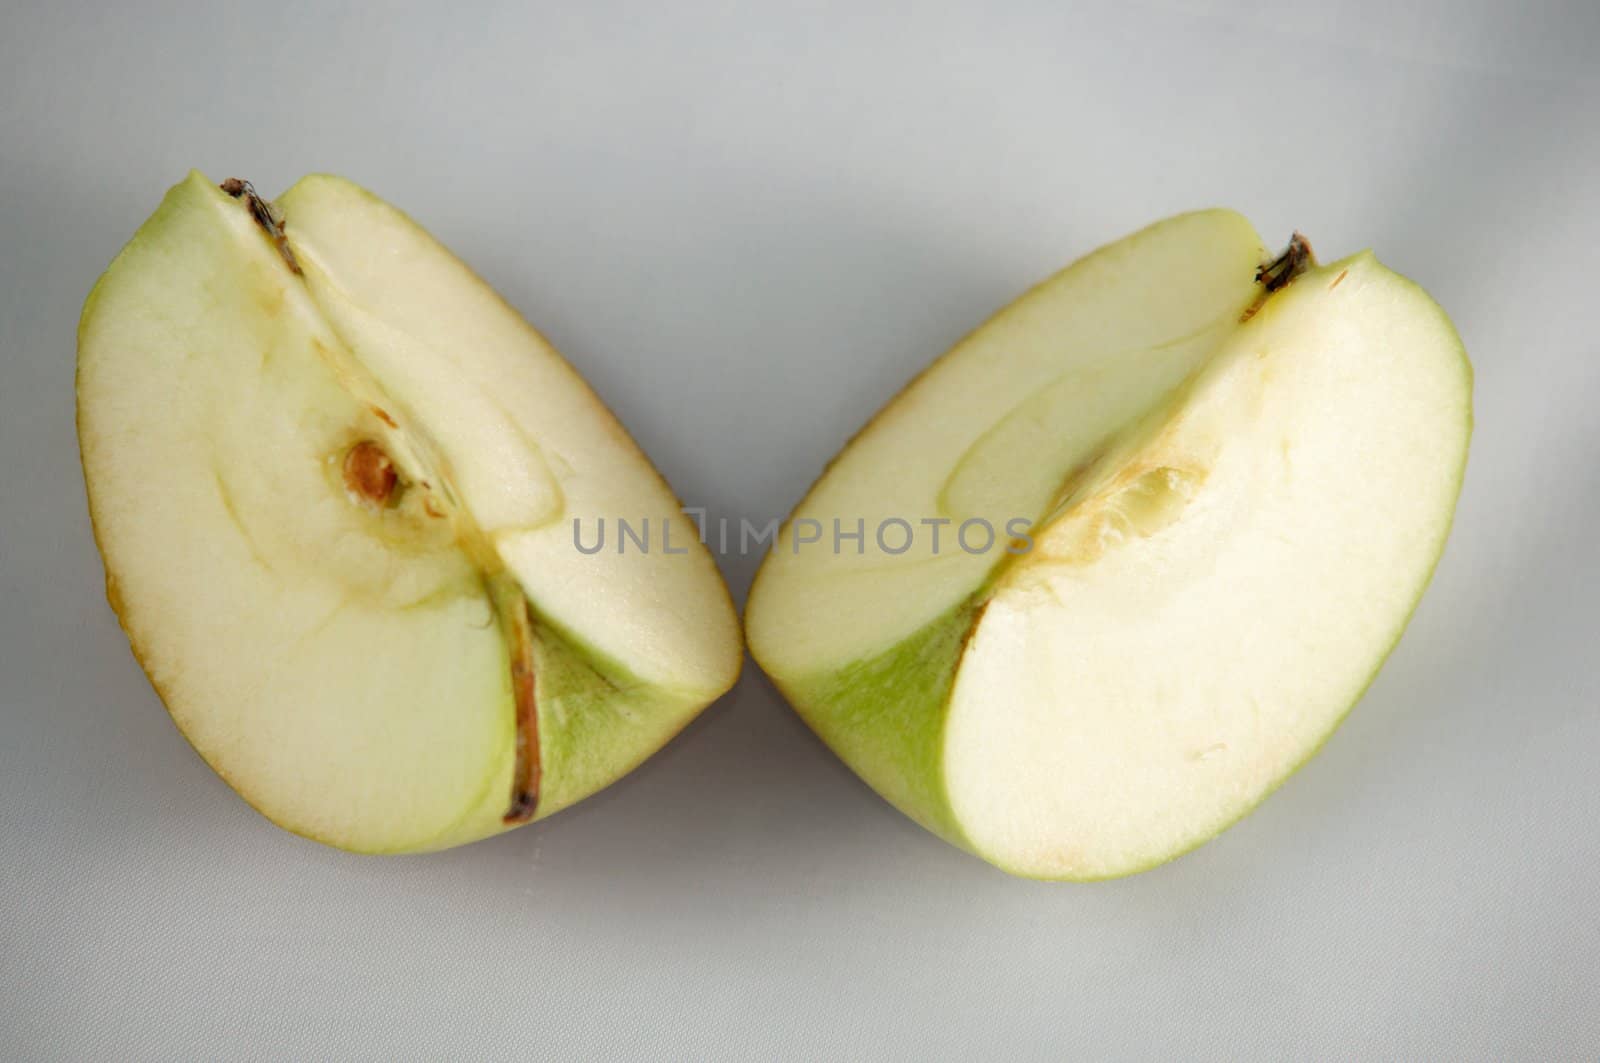 Two quarters of green apple on a white surface.